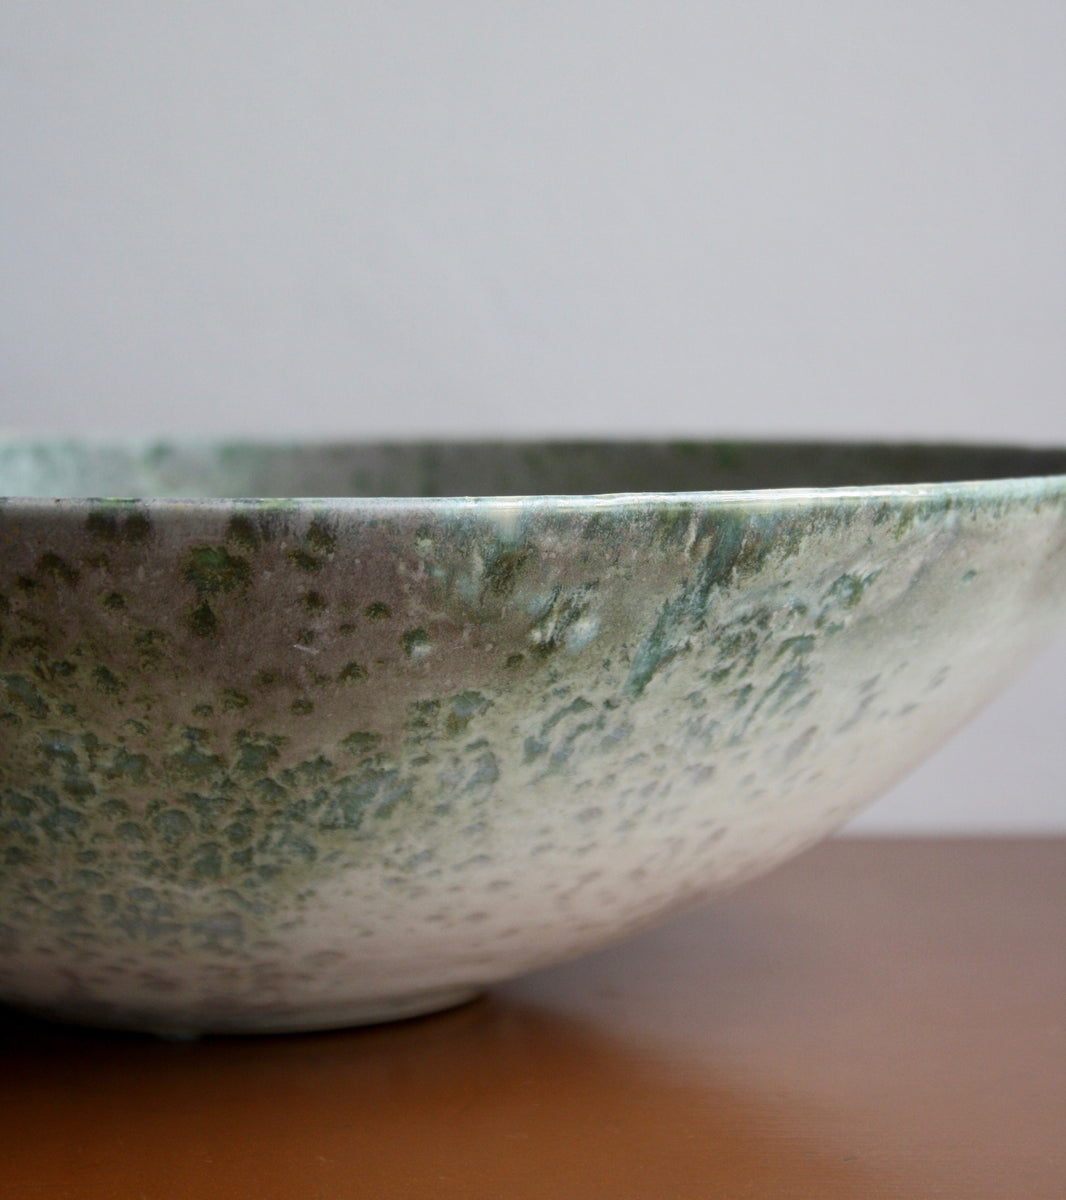 Massive Bowl / Turquoise, Green, Ombre, Grey Glaze